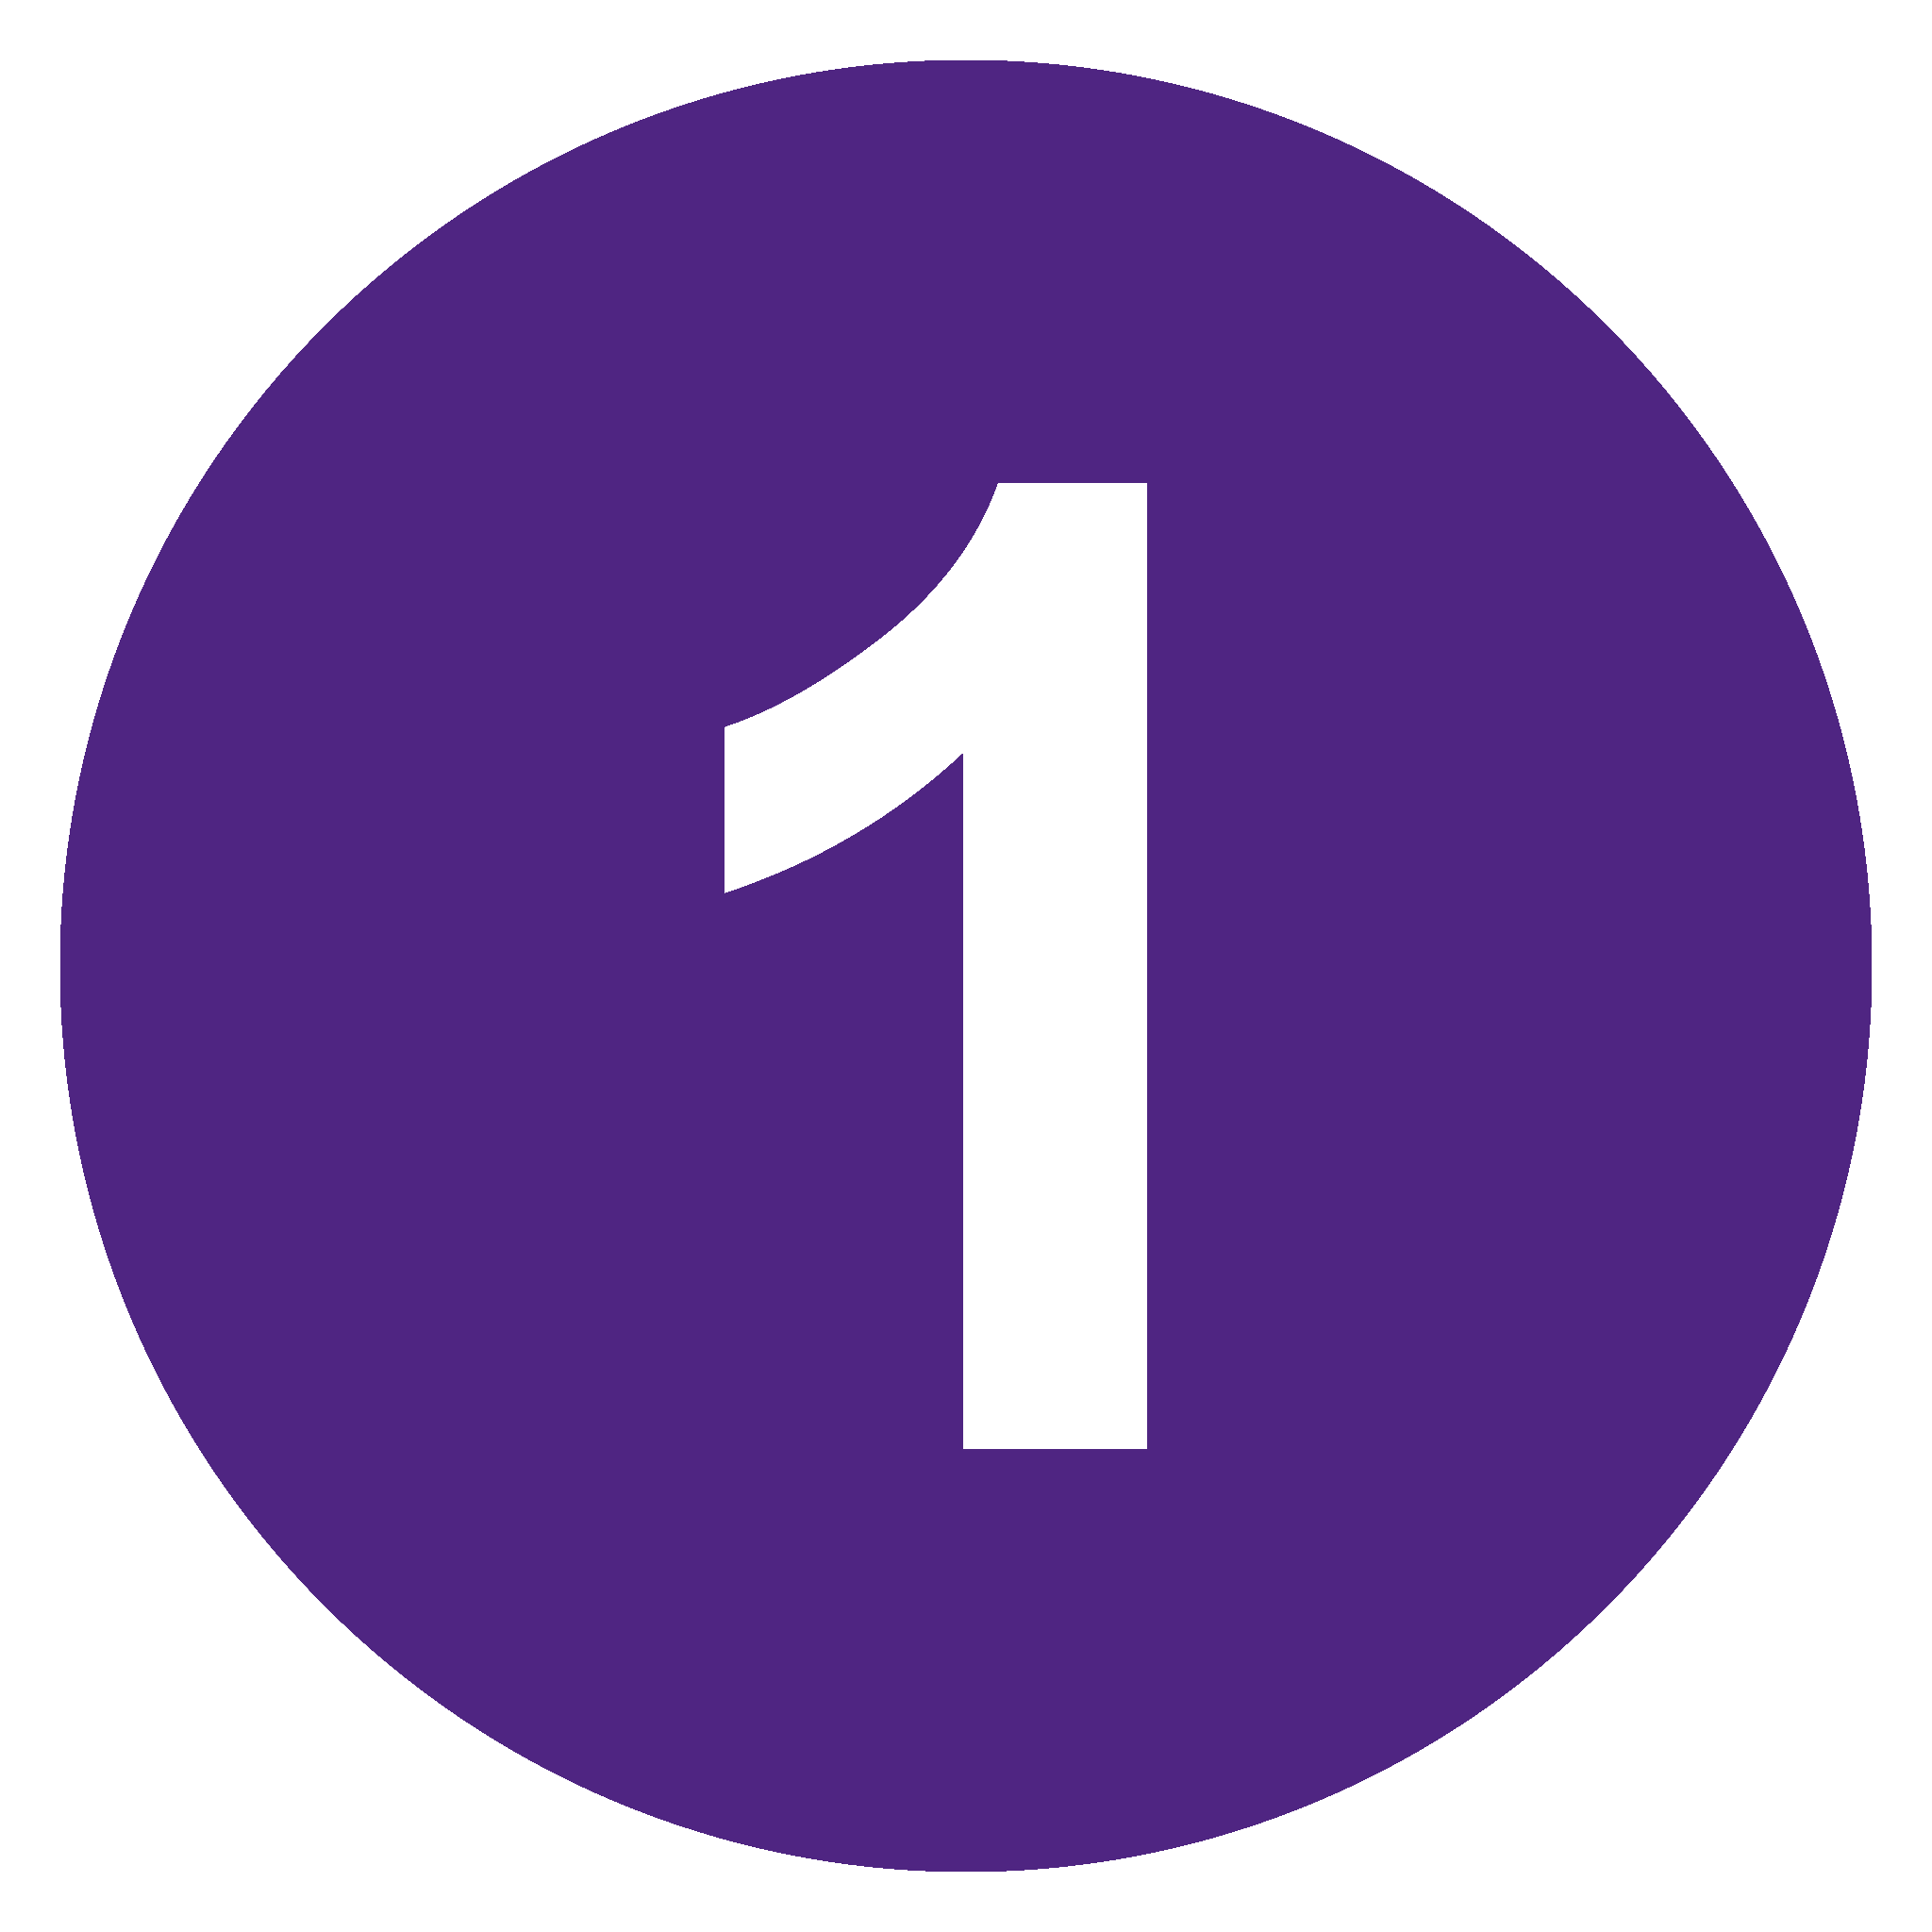 File:Eo circle purple number-2.svg - Wikimedia Commons